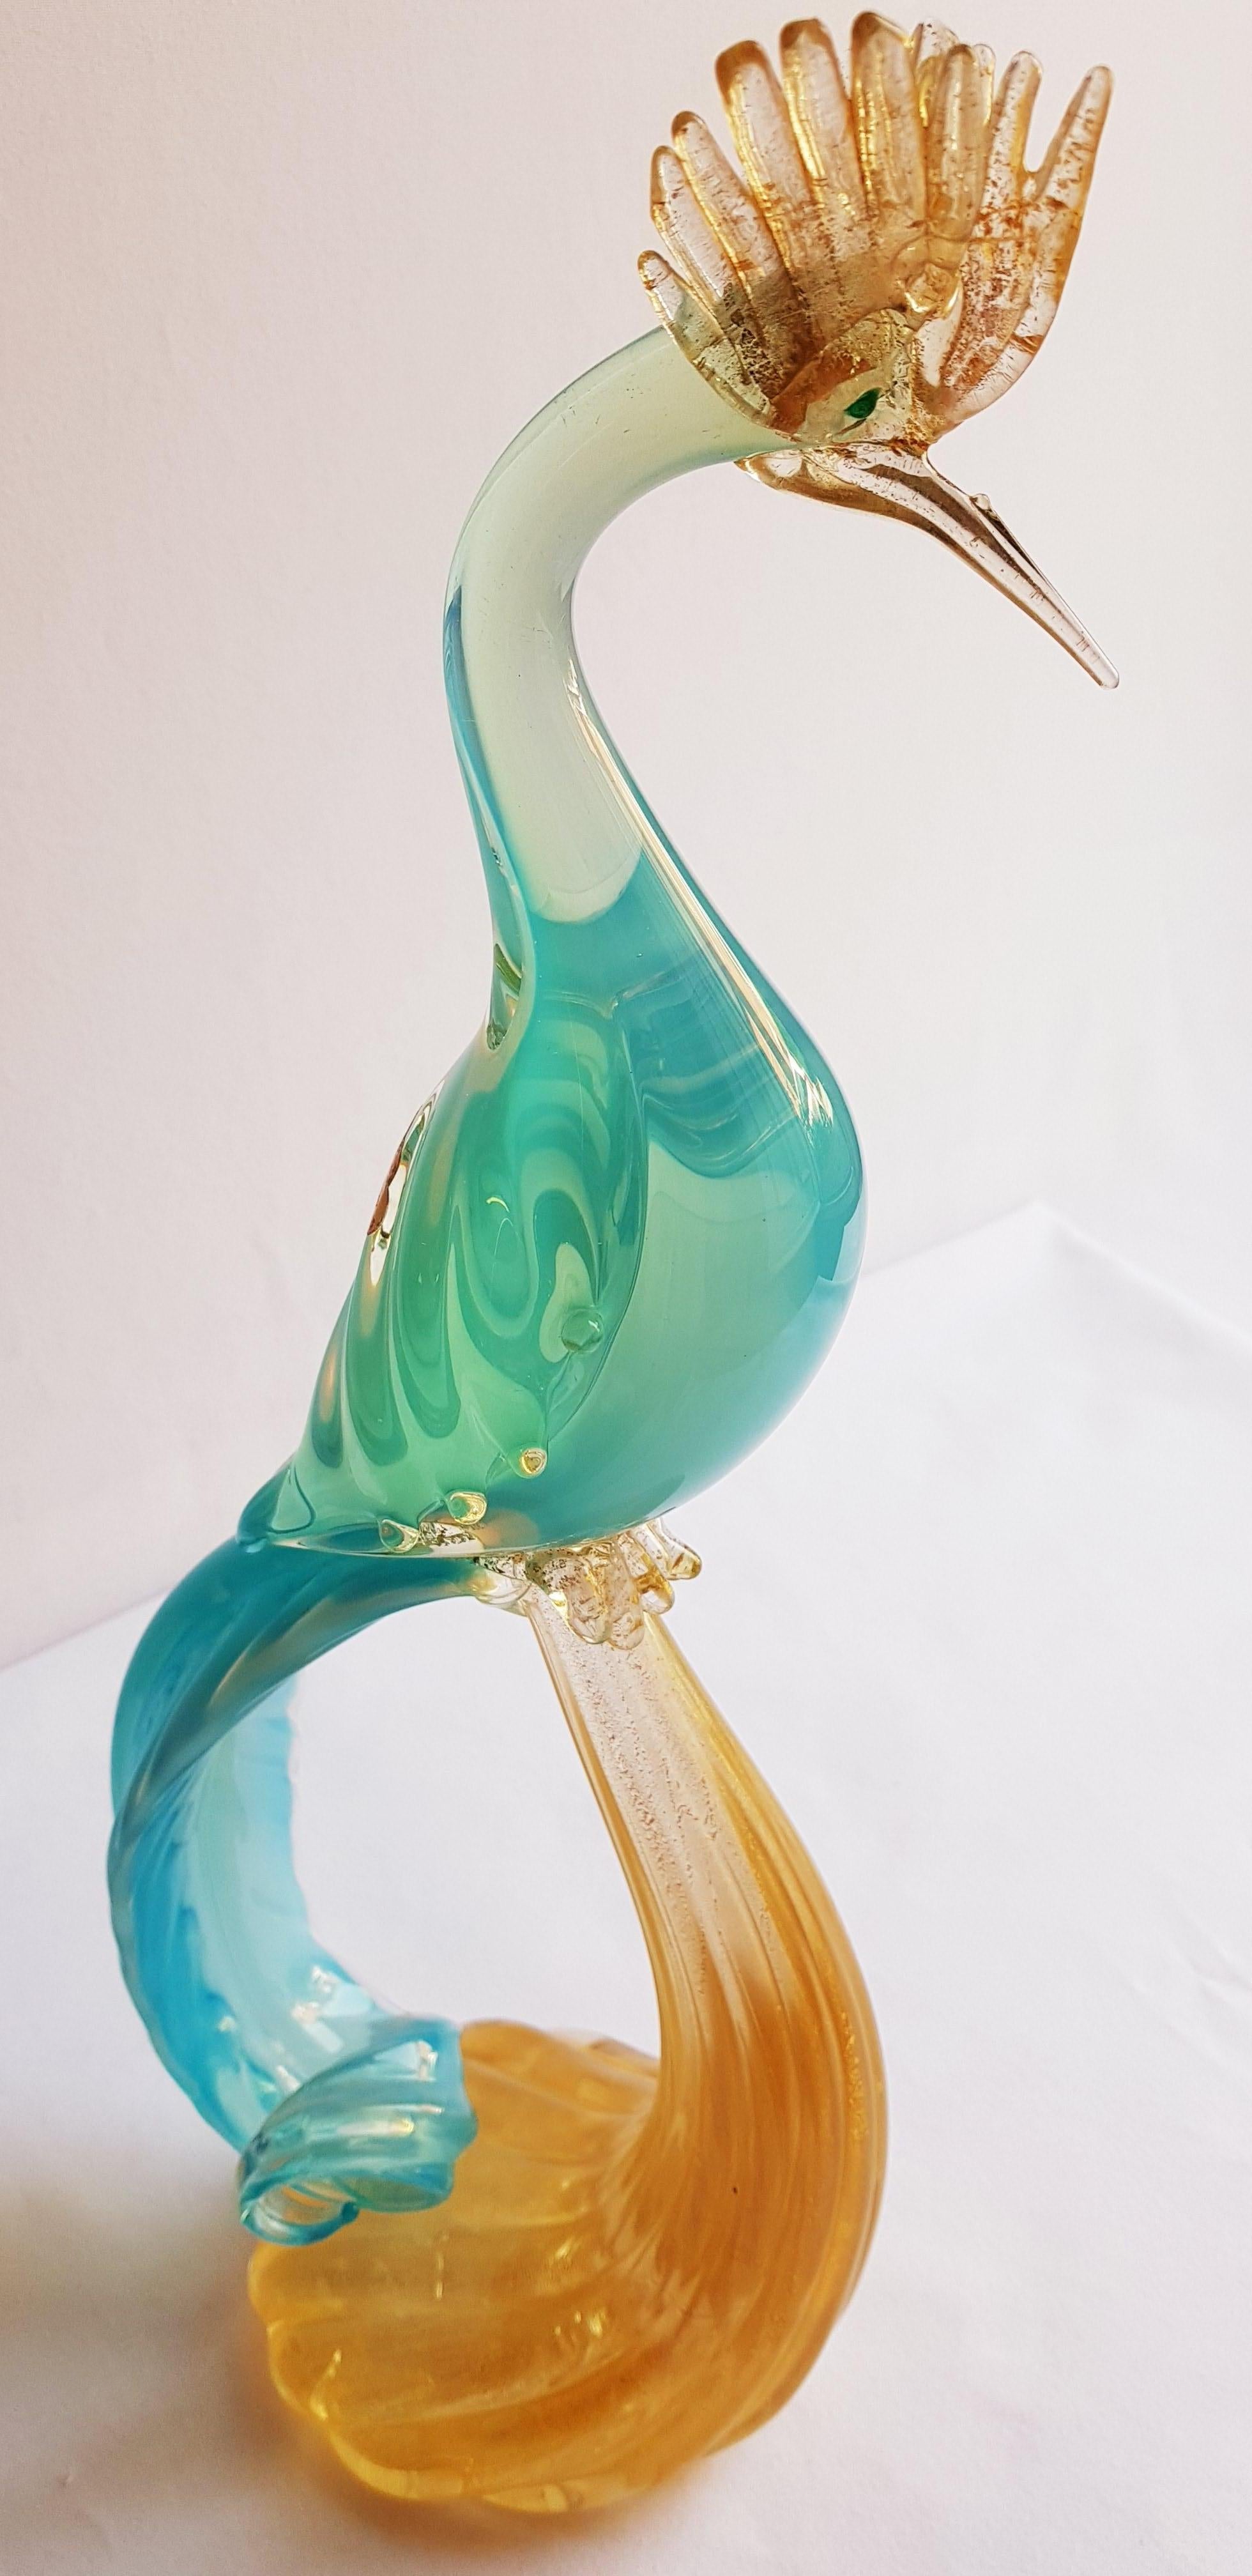 Beautiful murano glass large blue opal paradise bird with gold leaf by Alfredo Barbini brilliant condition beautiful home decor. This bird is a rare by the maestro Alfredo Barbini.